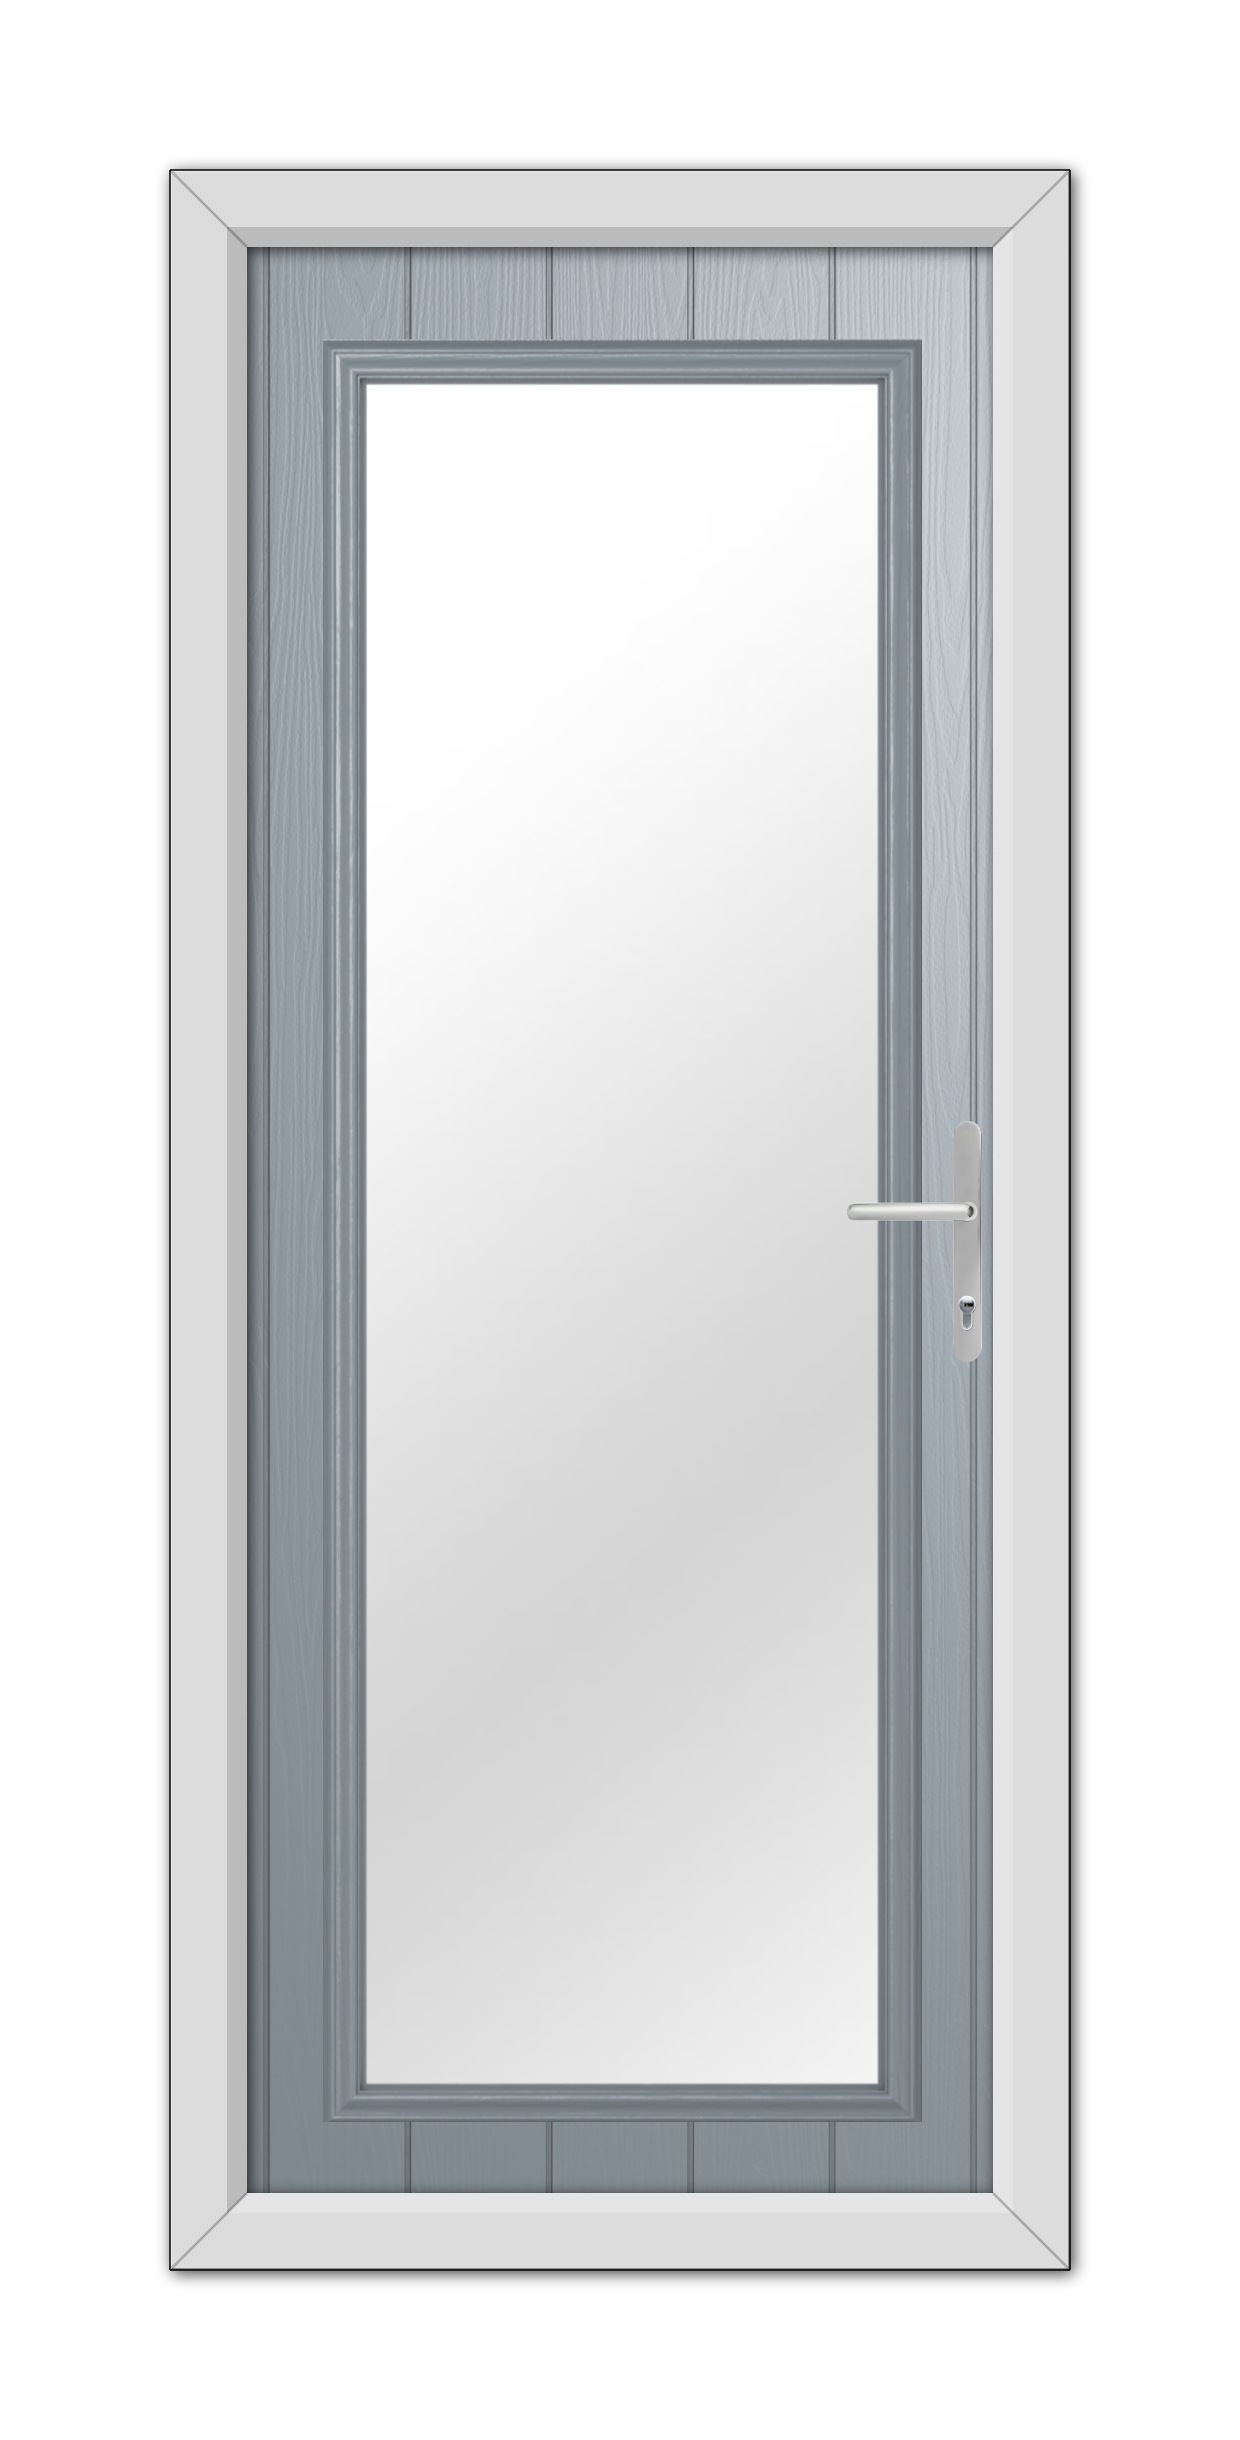 A modern French Grey Hatton Composite Door with a vertical handle, set within a white frame.